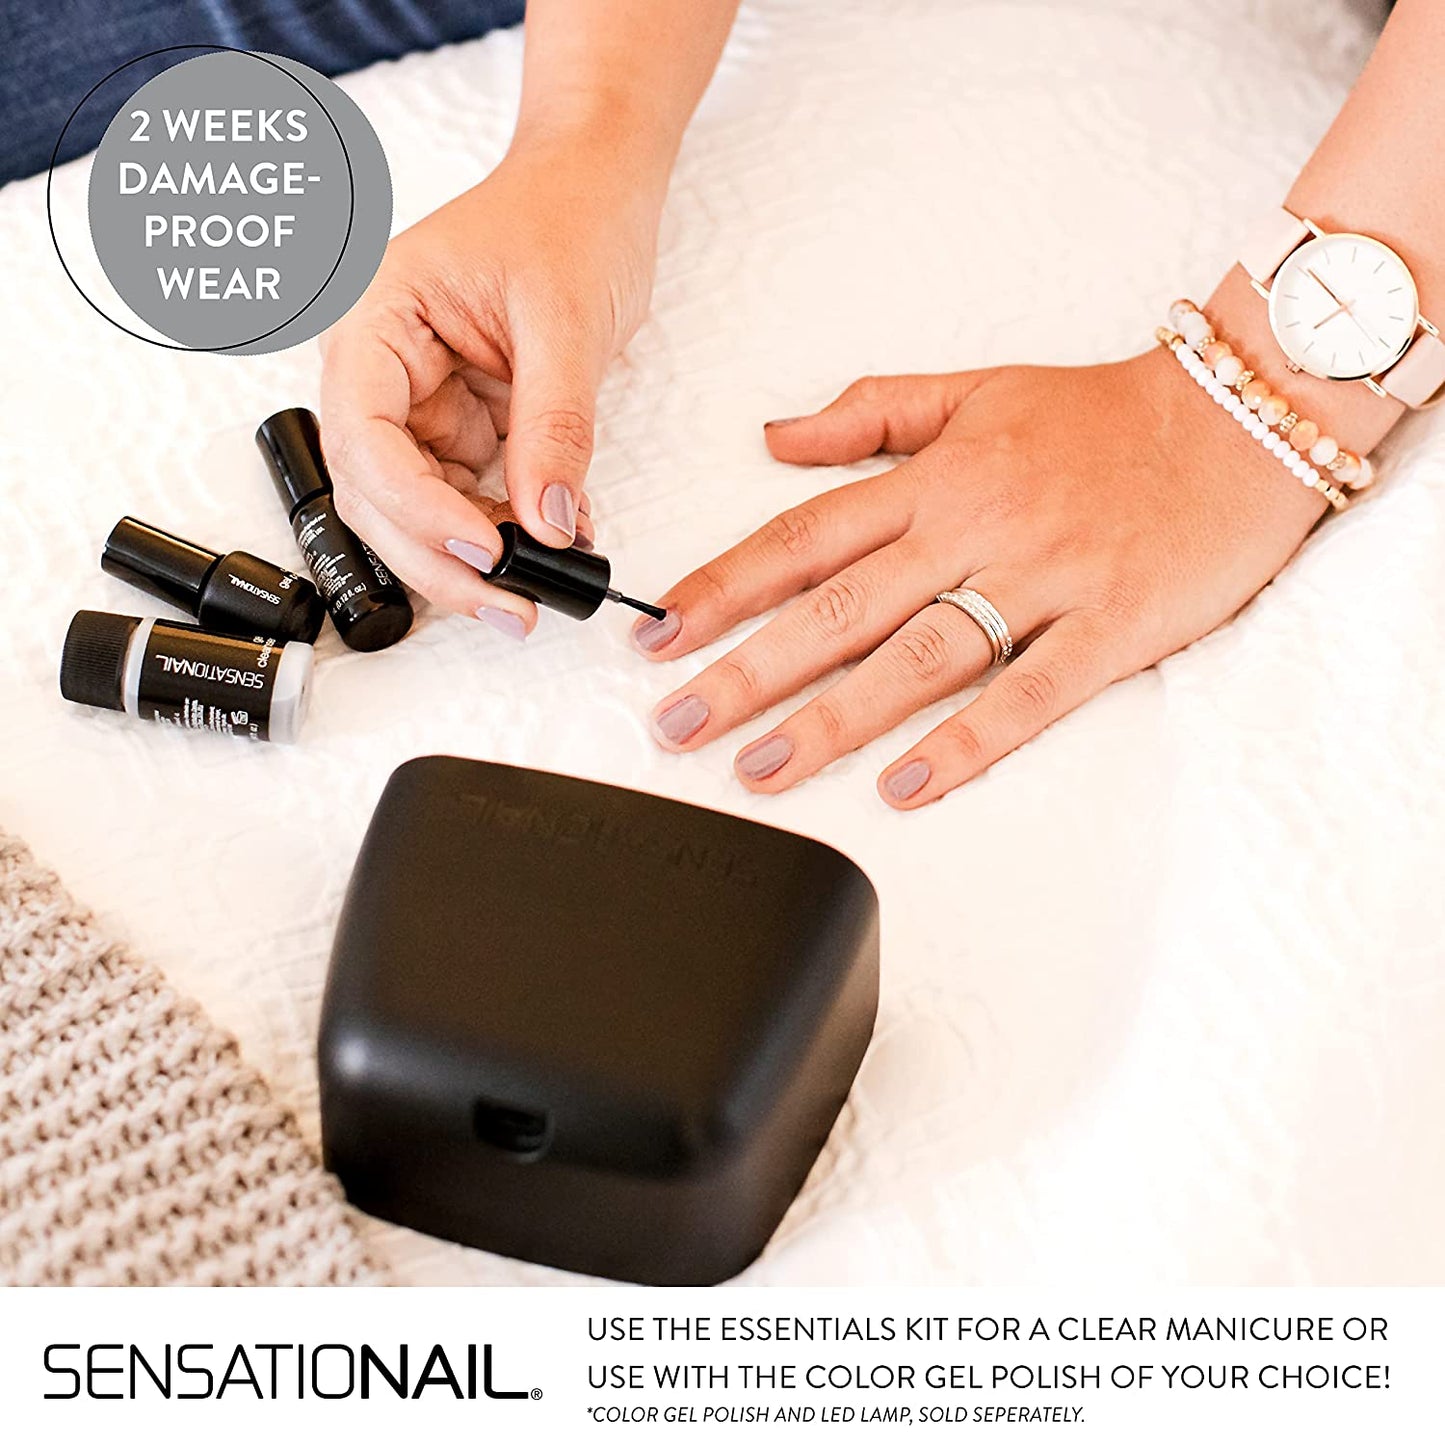 SensatioNail Gel Nail Polish Essentials Kit – Includes Nail Primer (3.54mL), Gel Base/Topcoat (7.39mL), and Nail Gel Cleanser (27.7mL) – DIY Manicure Kit for up to 2 Weeks of Wear